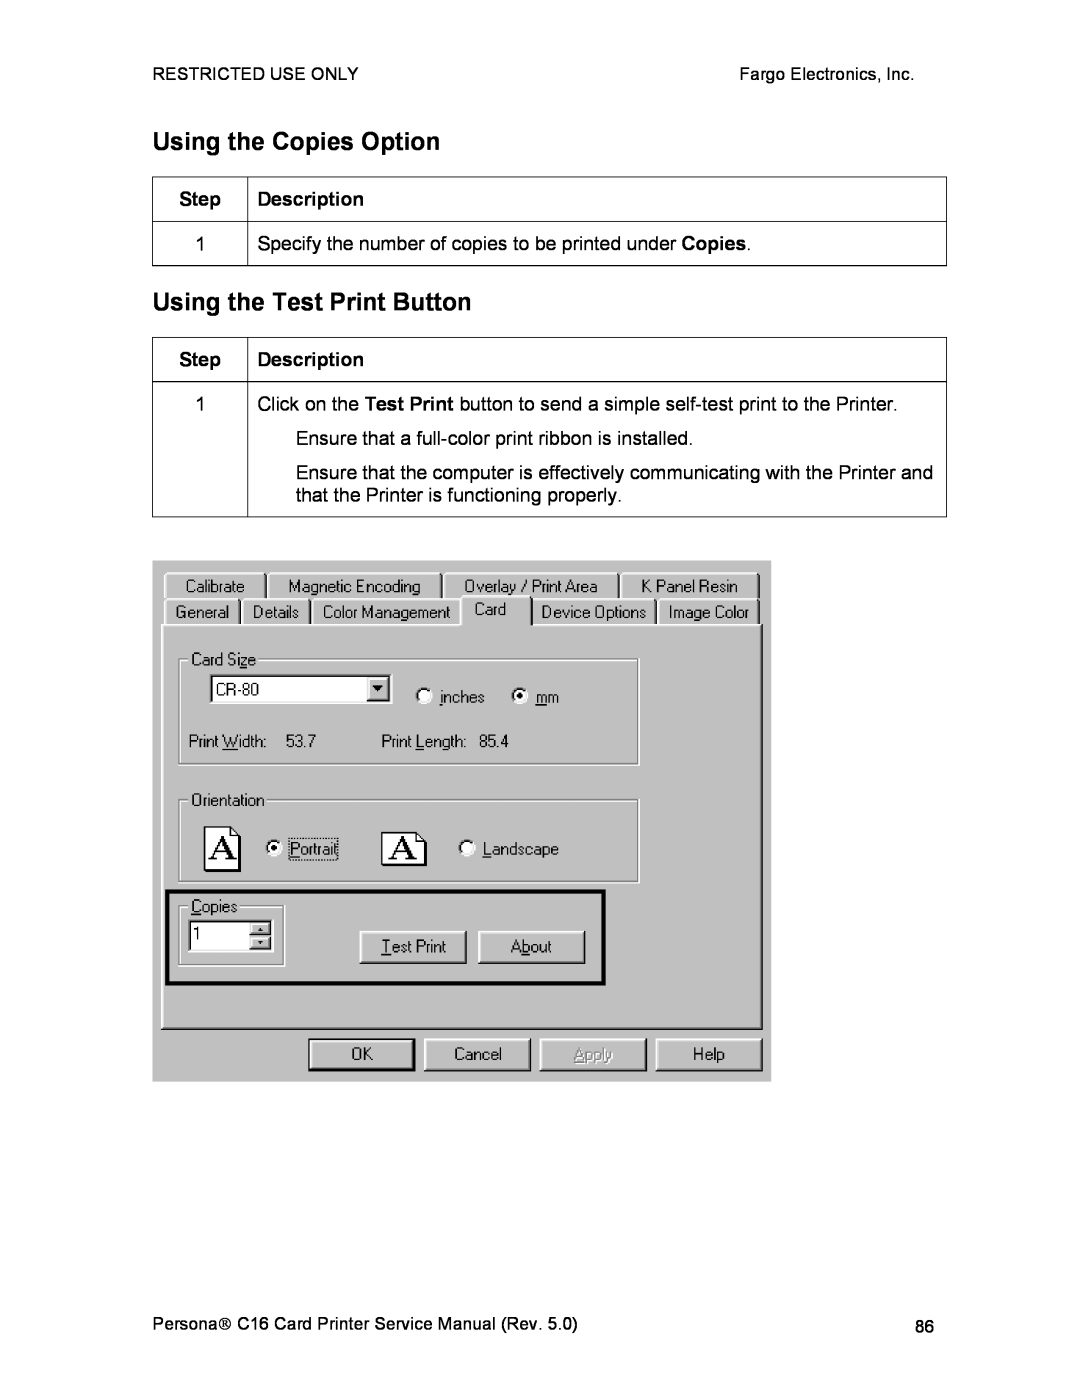 FARGO electronic C16 service manual Using the Copies Option, Using the Test Print Button 